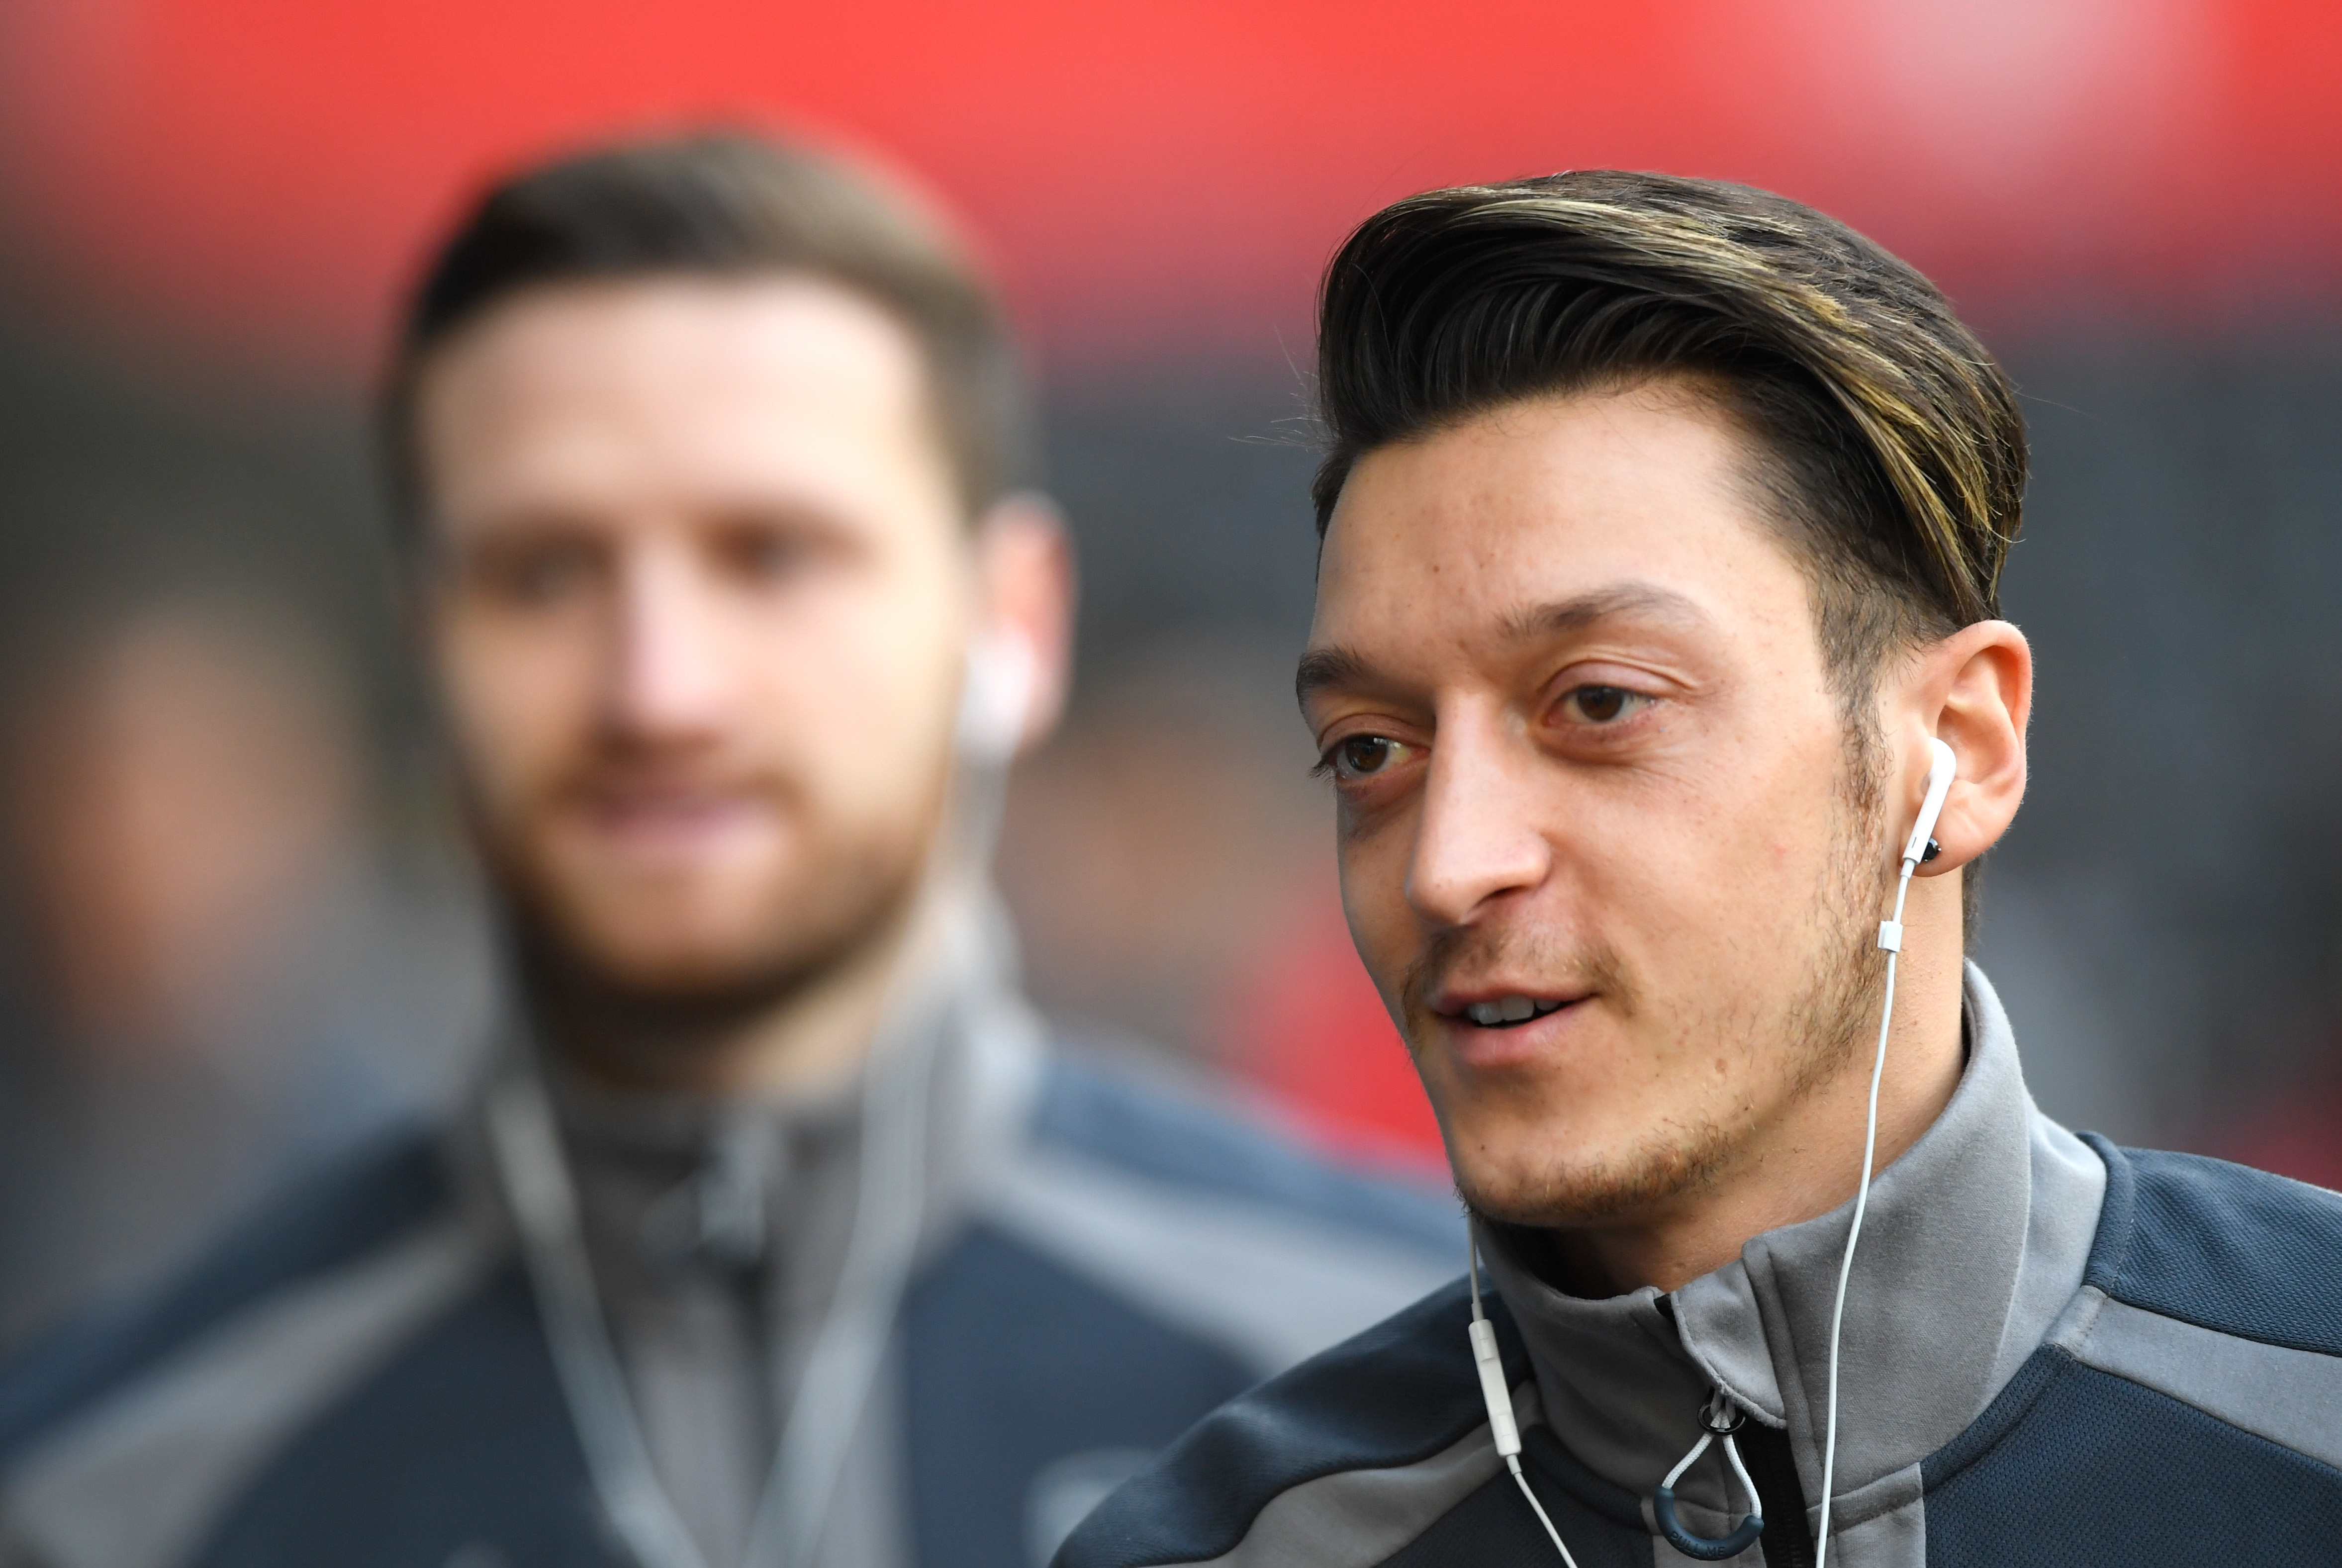 SWANSEA, WALES - JANUARY 14: Mesut Ozil of Arsenal arrives at the stadium prior to the Premier League match between Swansea City and Arsenal at Liberty Stadium on January 14, 2017 in Swansea, Wales.  (Photo by Stu Forster/Getty Images)